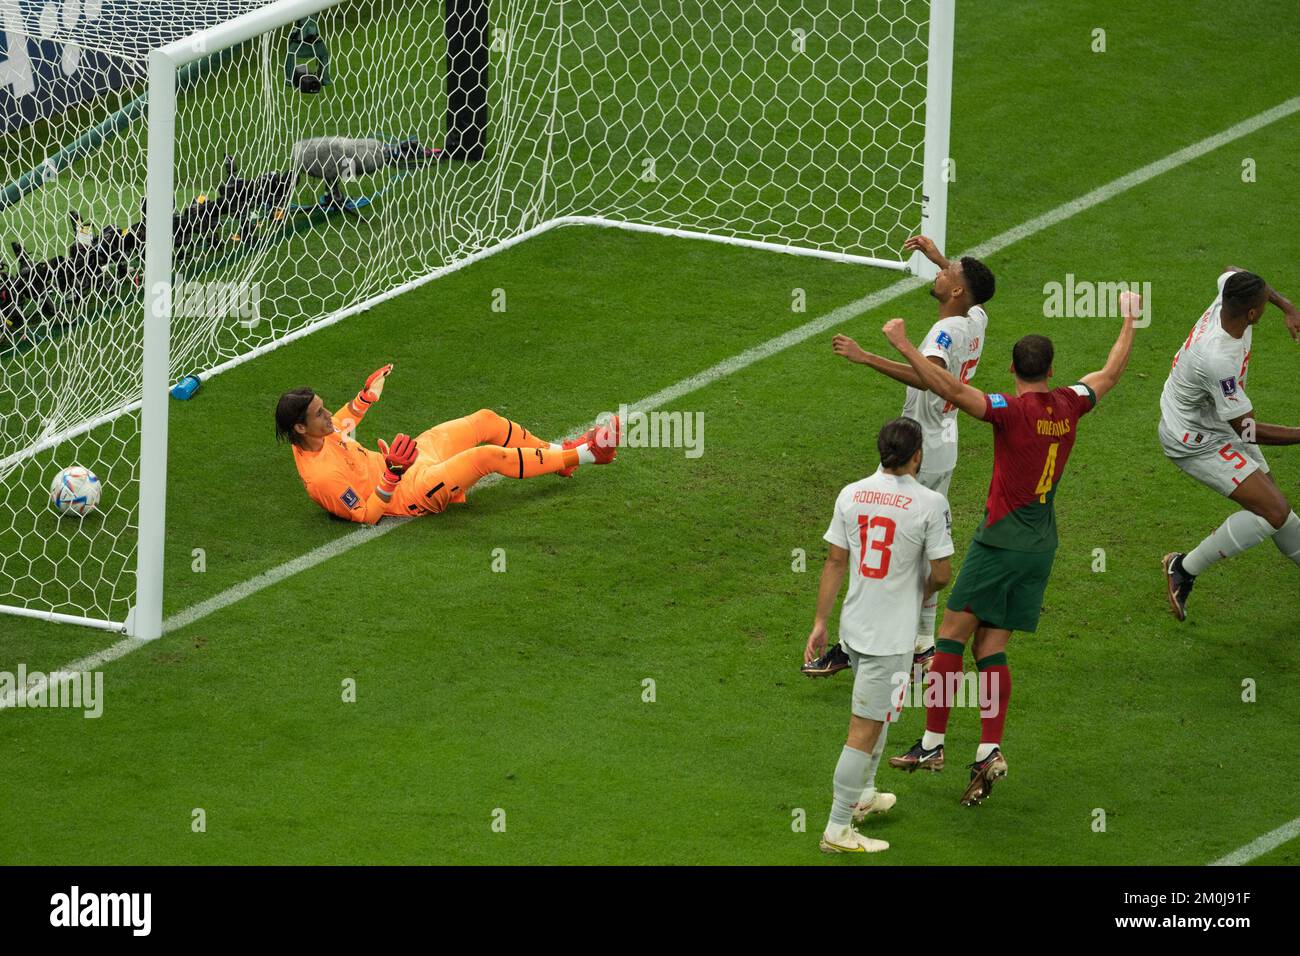 Lusail, Qatar. 6th Dec, 2022. Yann Sommer (1st L), goalkeeper of Switzerland, fails to save the ball during the Round of 16 match between Portugal and Switzerland of the 2022 FIFA World Cup at Lusail Stadium in Lusail, Qatar, Dec. 6, 2022. Credit: Xiao Yijiu/Xinhua/Alamy Live News Stock Photo